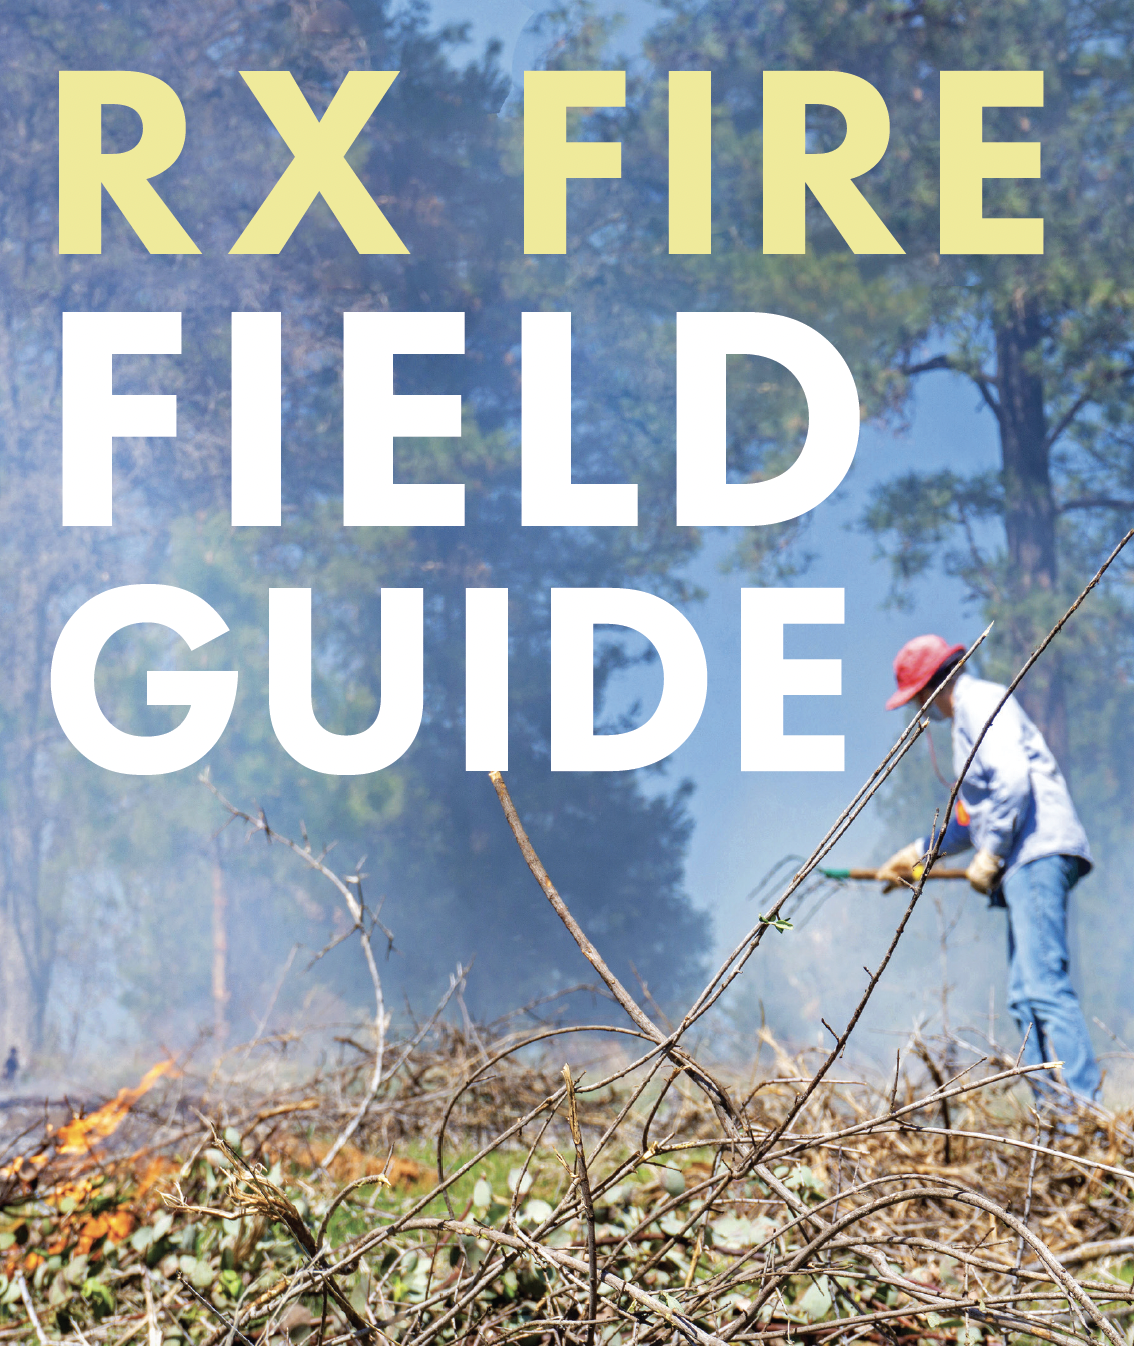 Image of person working on a prescribed fire with the text "Rx Fire Field Guide" overlaid.